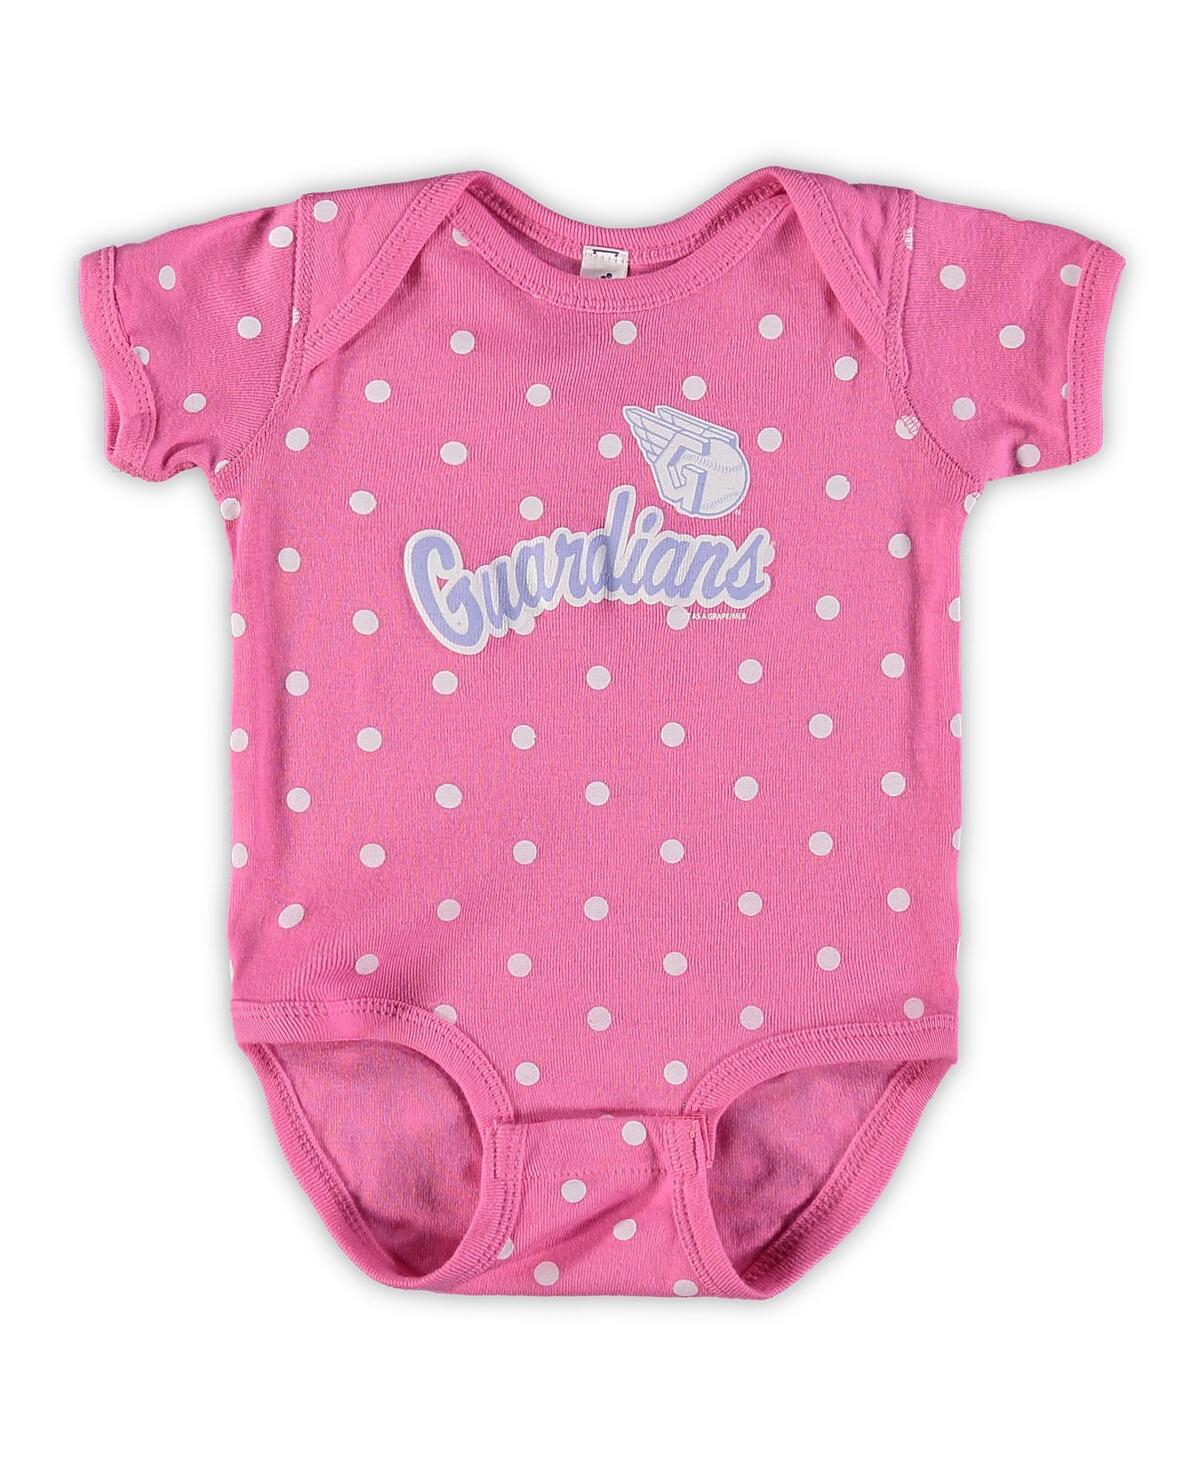 Shop Soft As A Grape Infant Boys And Girls  Pink, Purple Cleveland Guardians 3-pack Rookie Bodysuit Set In Pink,purple